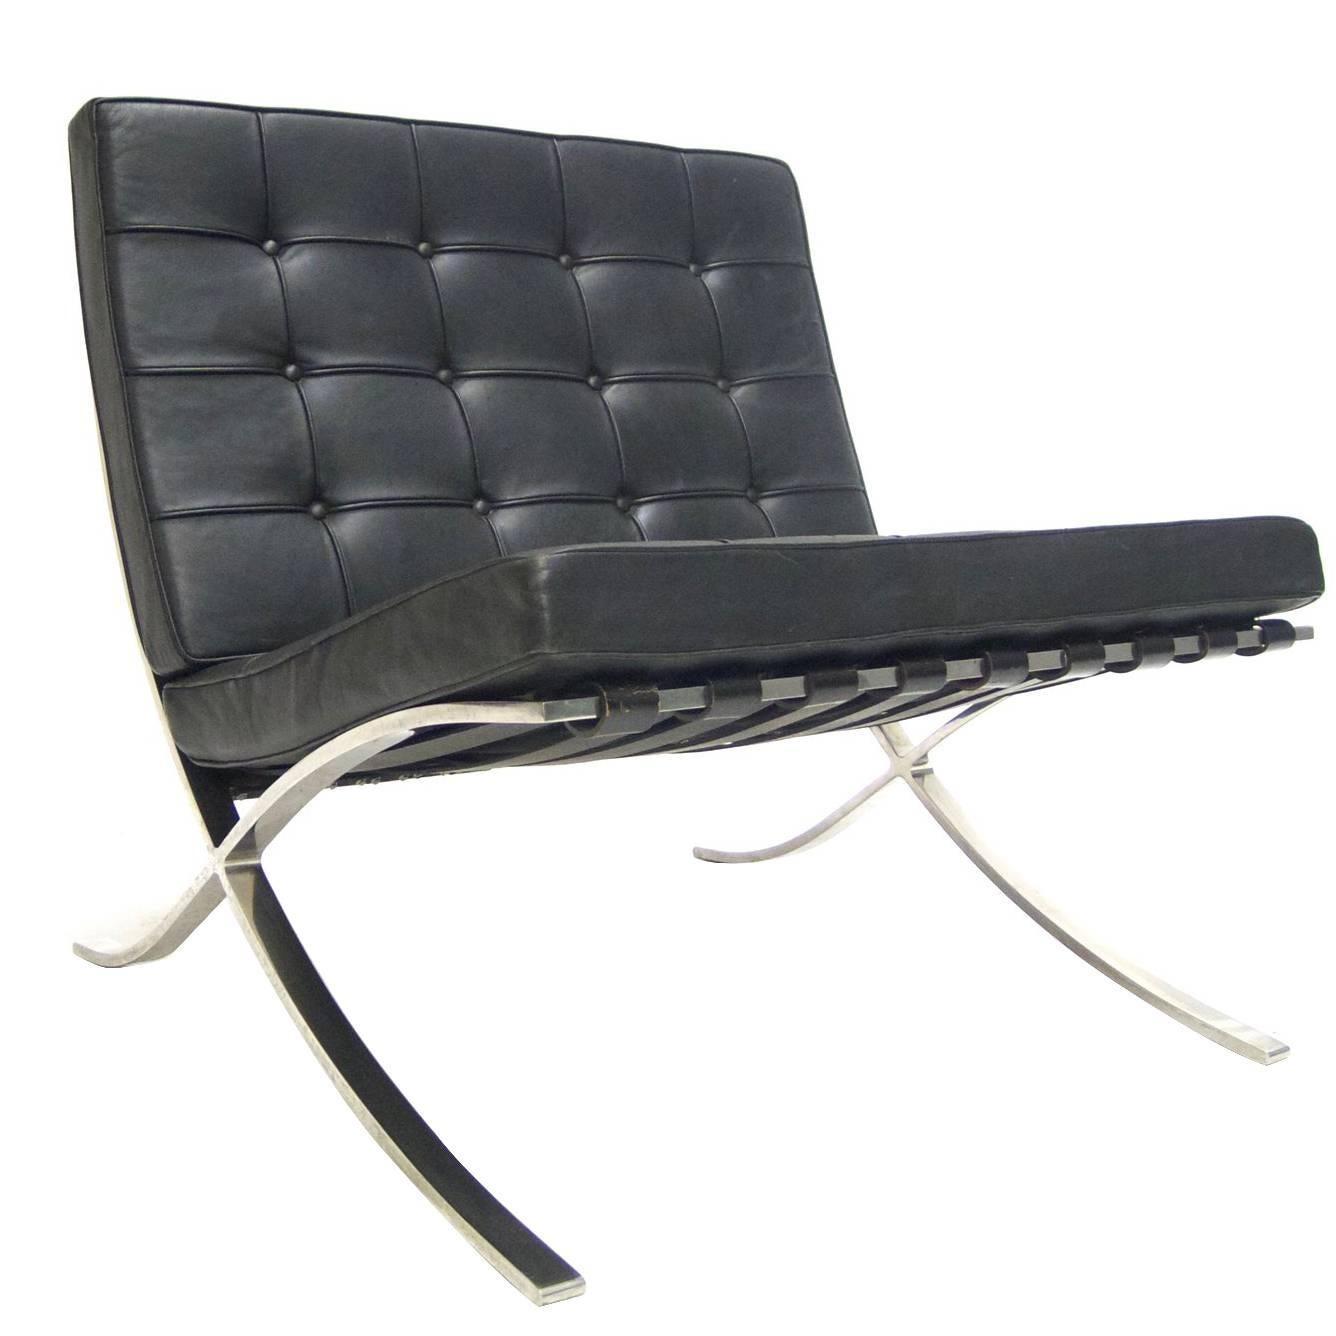  Early Black Leather Tufted Mies Van Der Rohe Barcelona Chair by Knoll